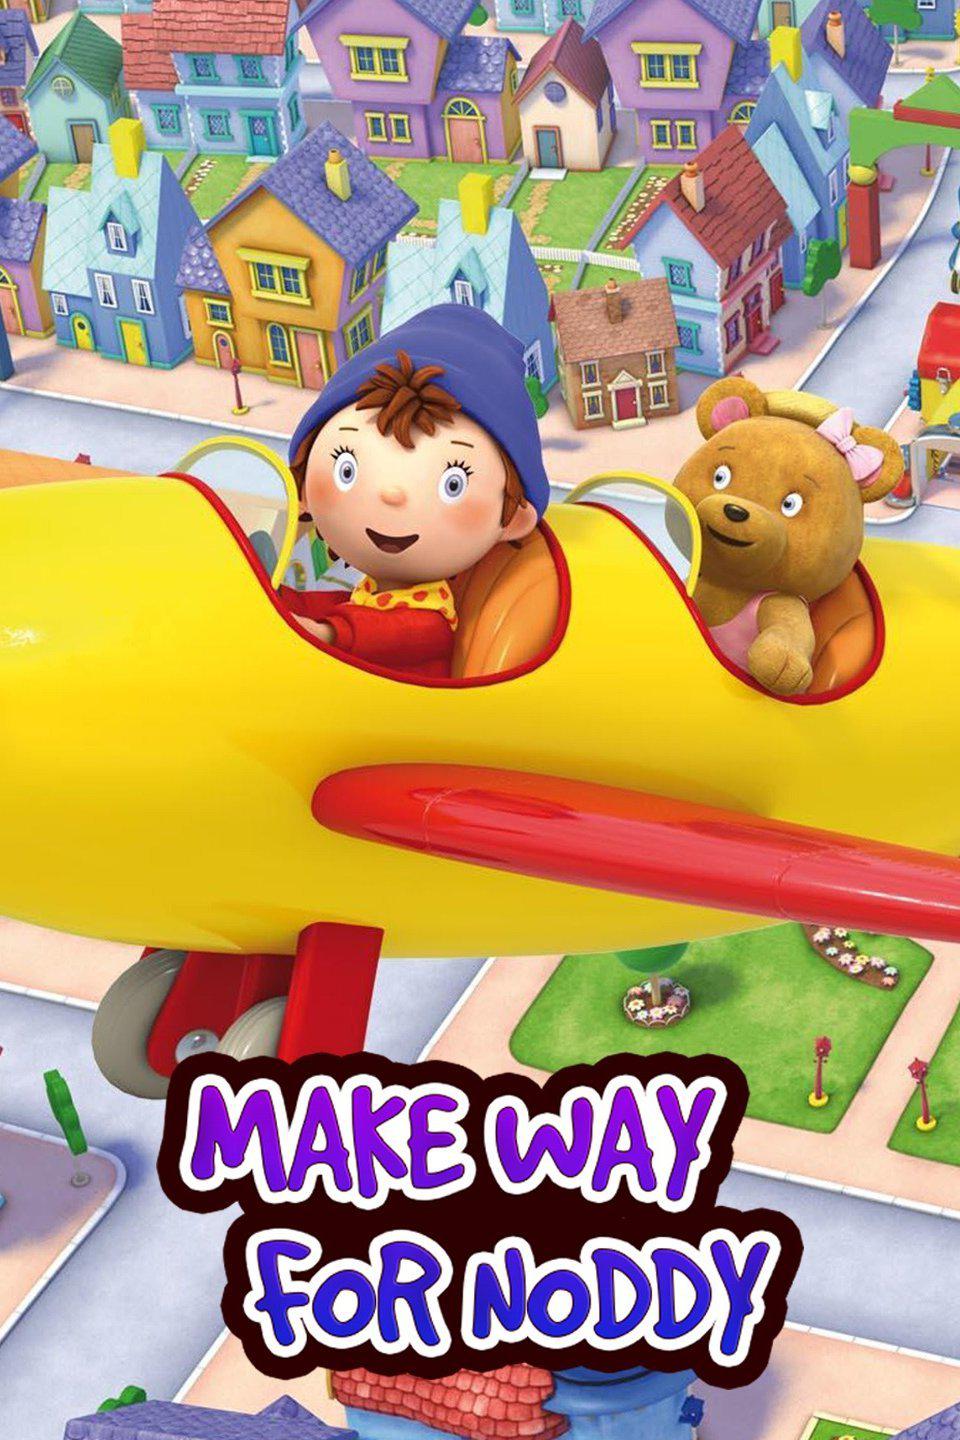 TV ratings for Make Way For Noddy in Russia. PBS Kids TV series